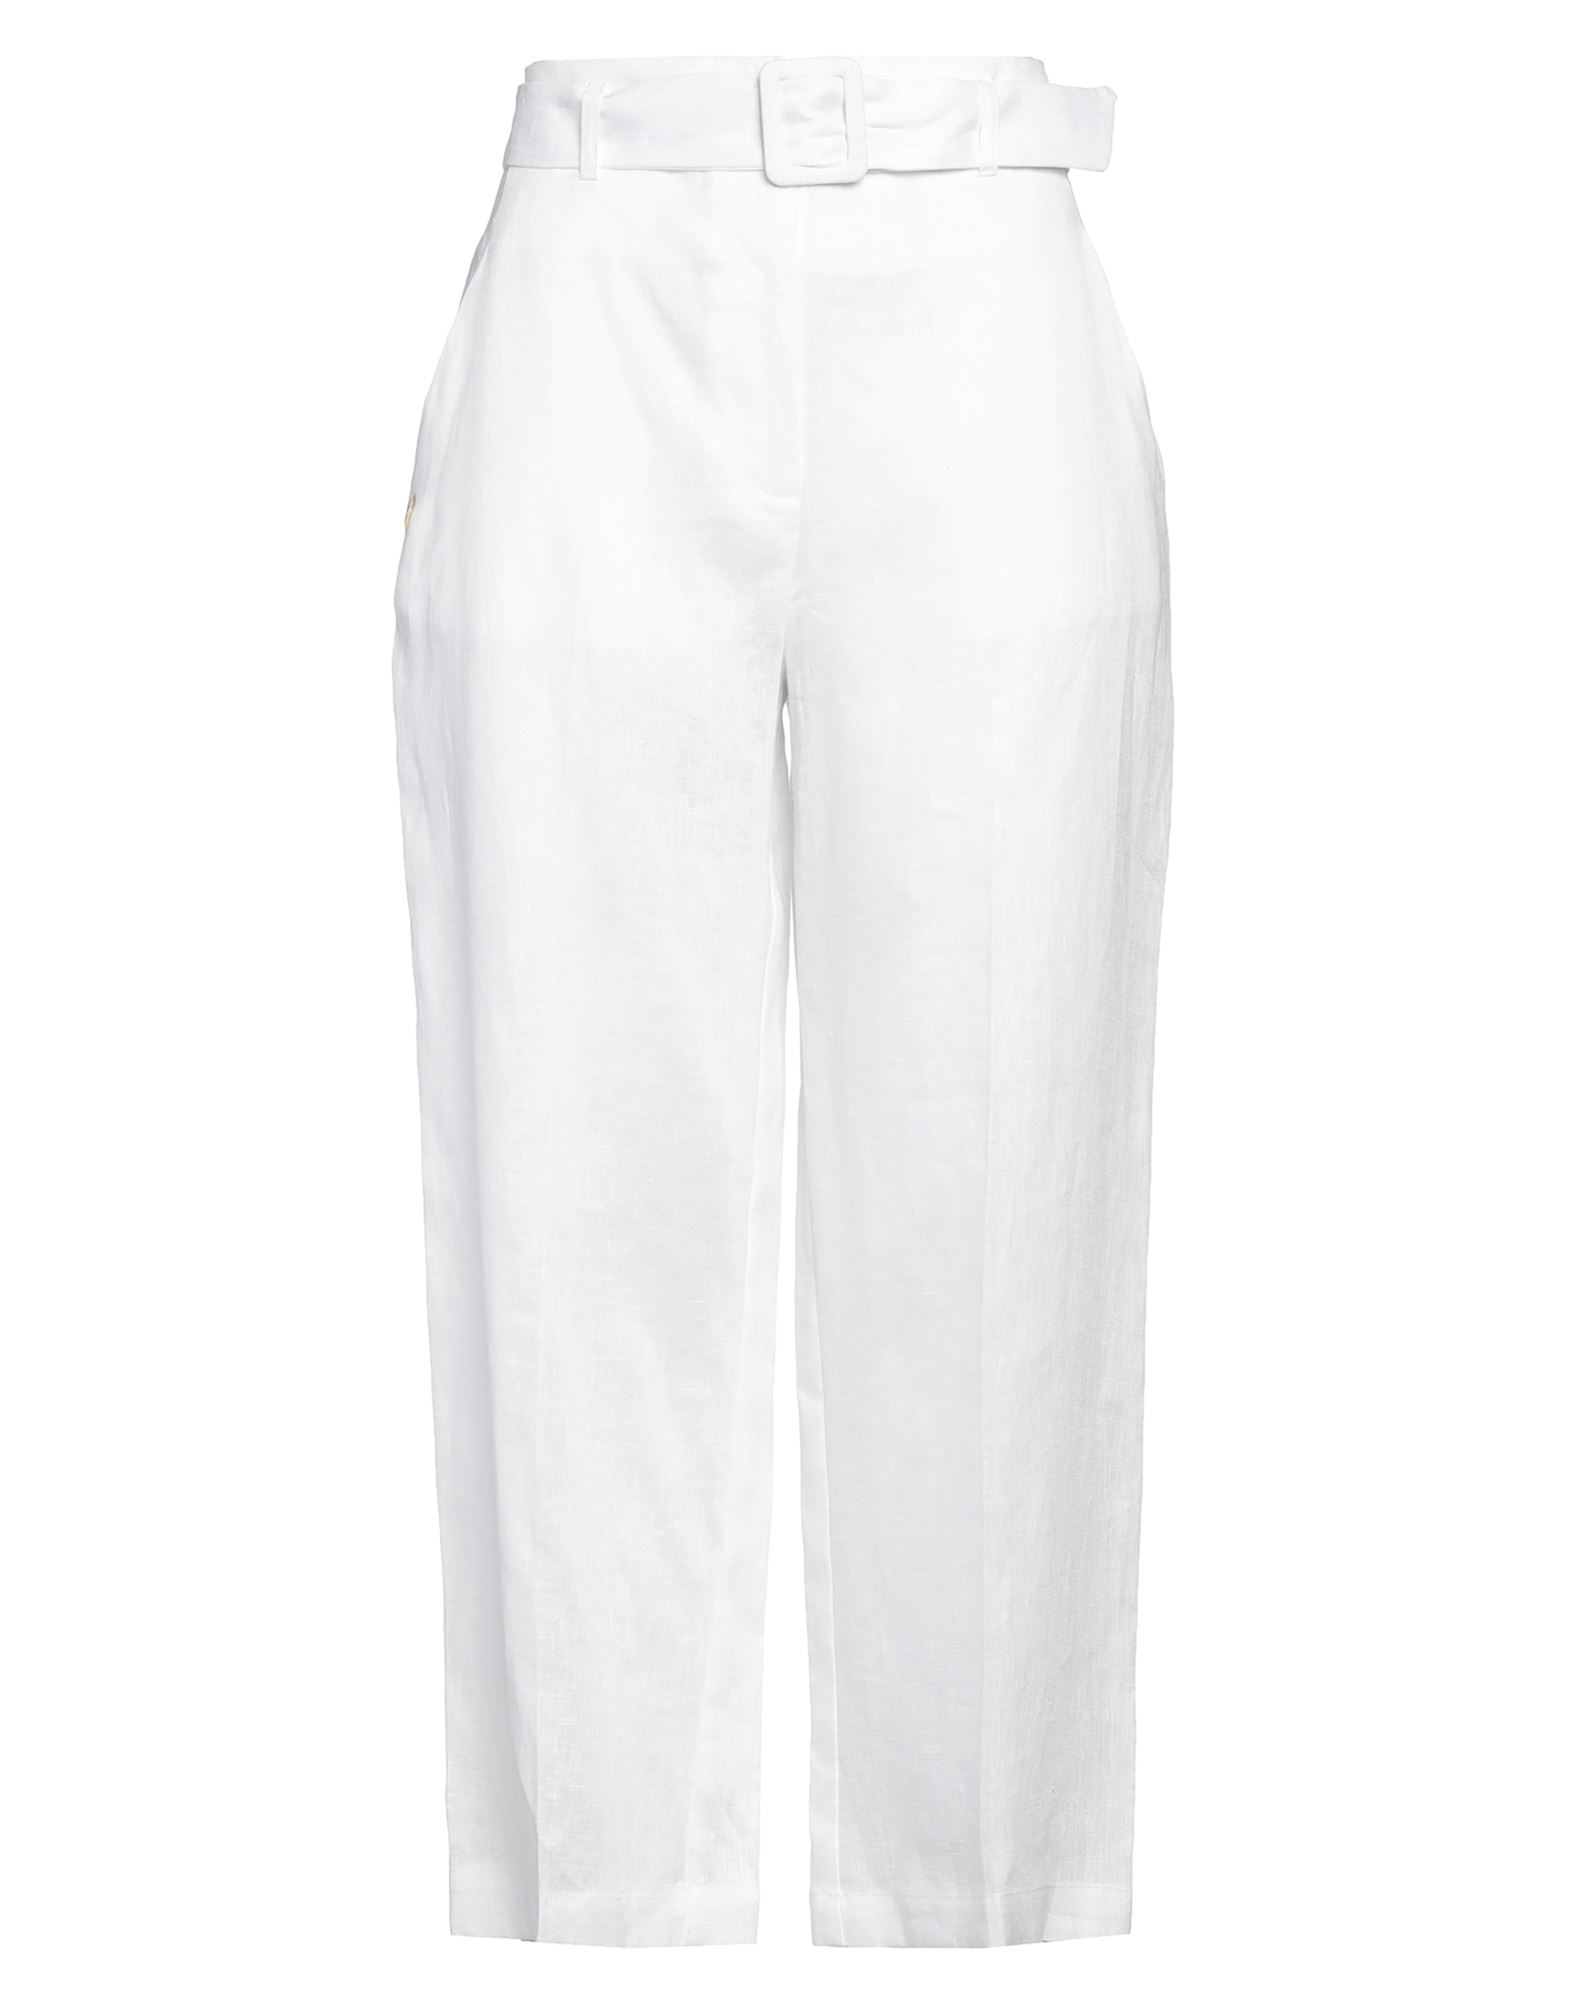 Lfdl Pants In White